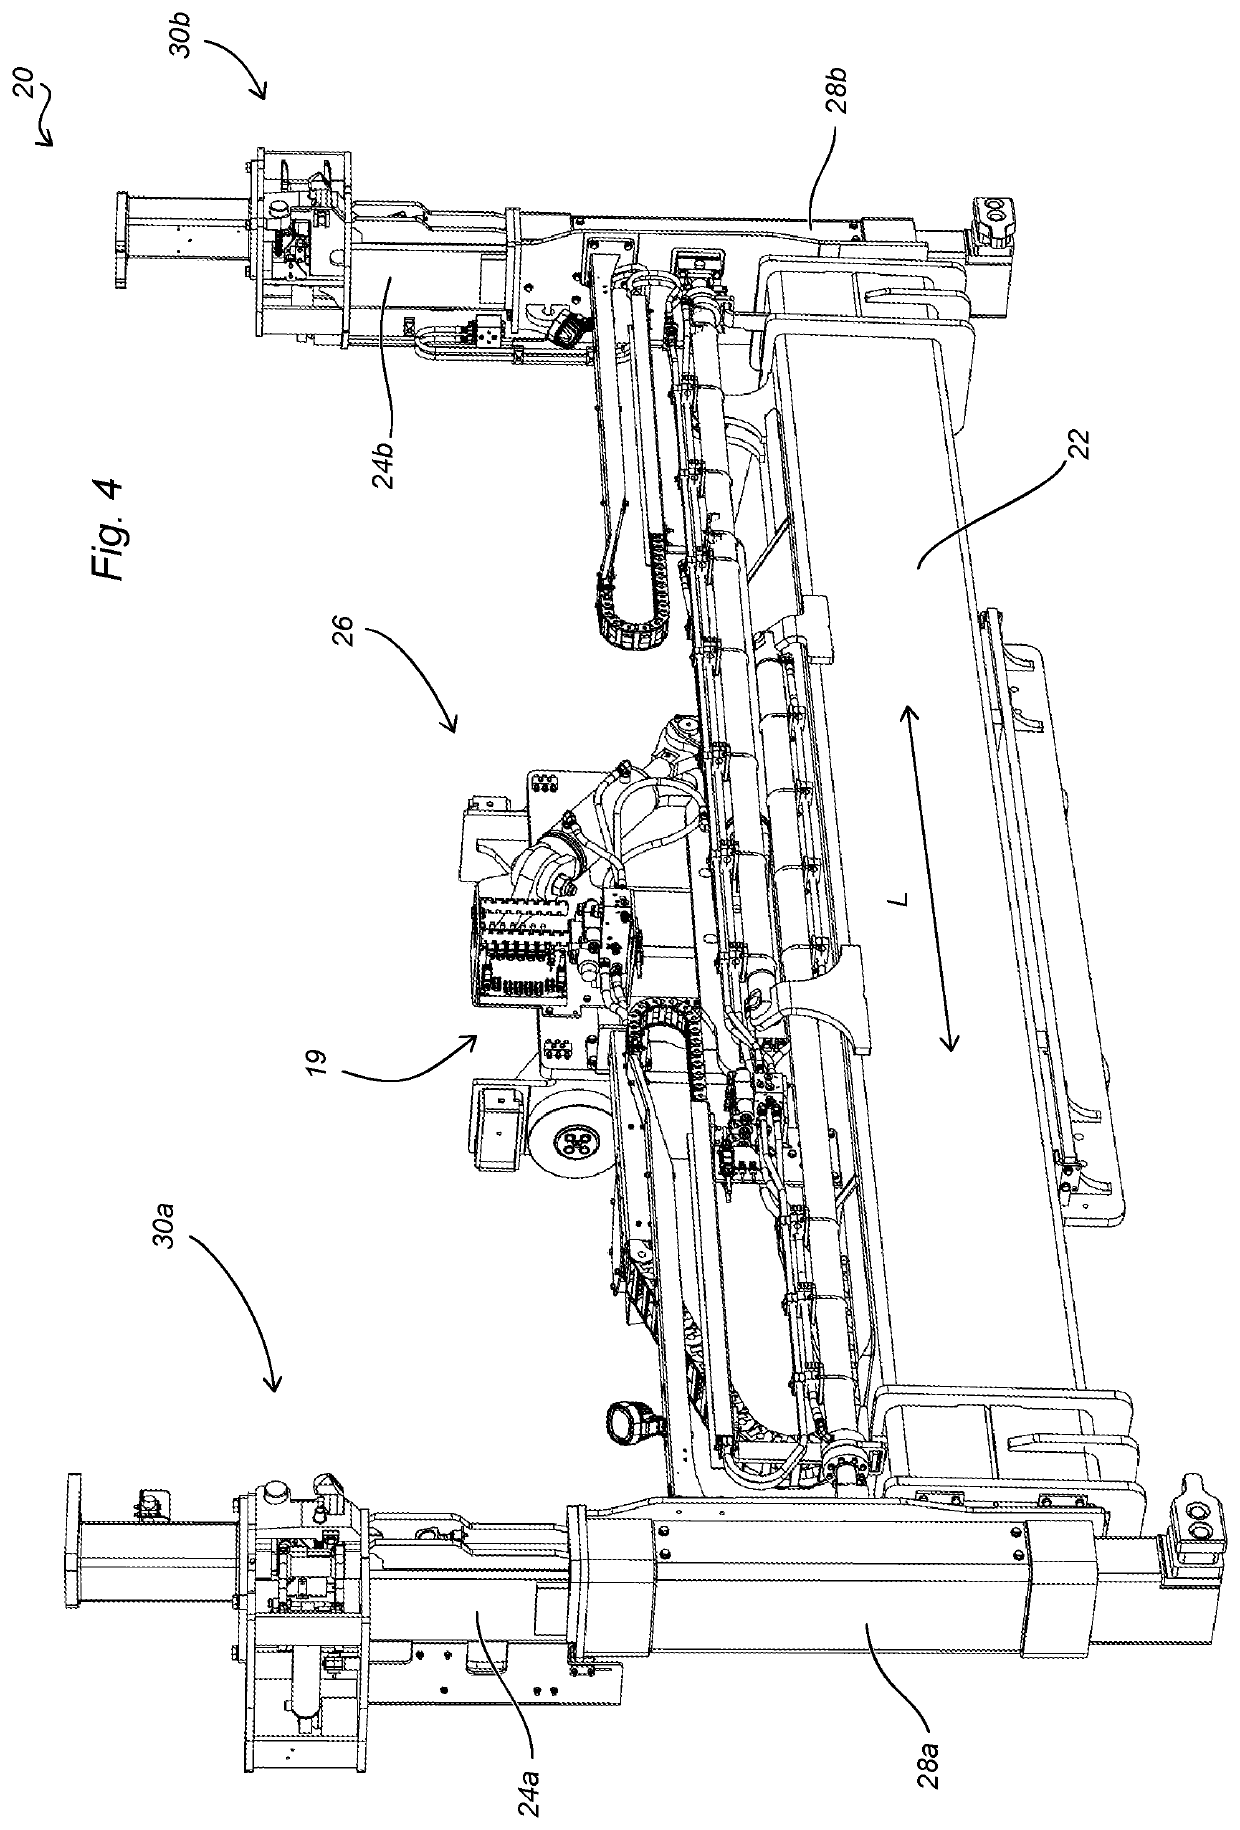 Side lift spreader for lifting intermodal containers, and method of operating a side lift spreader